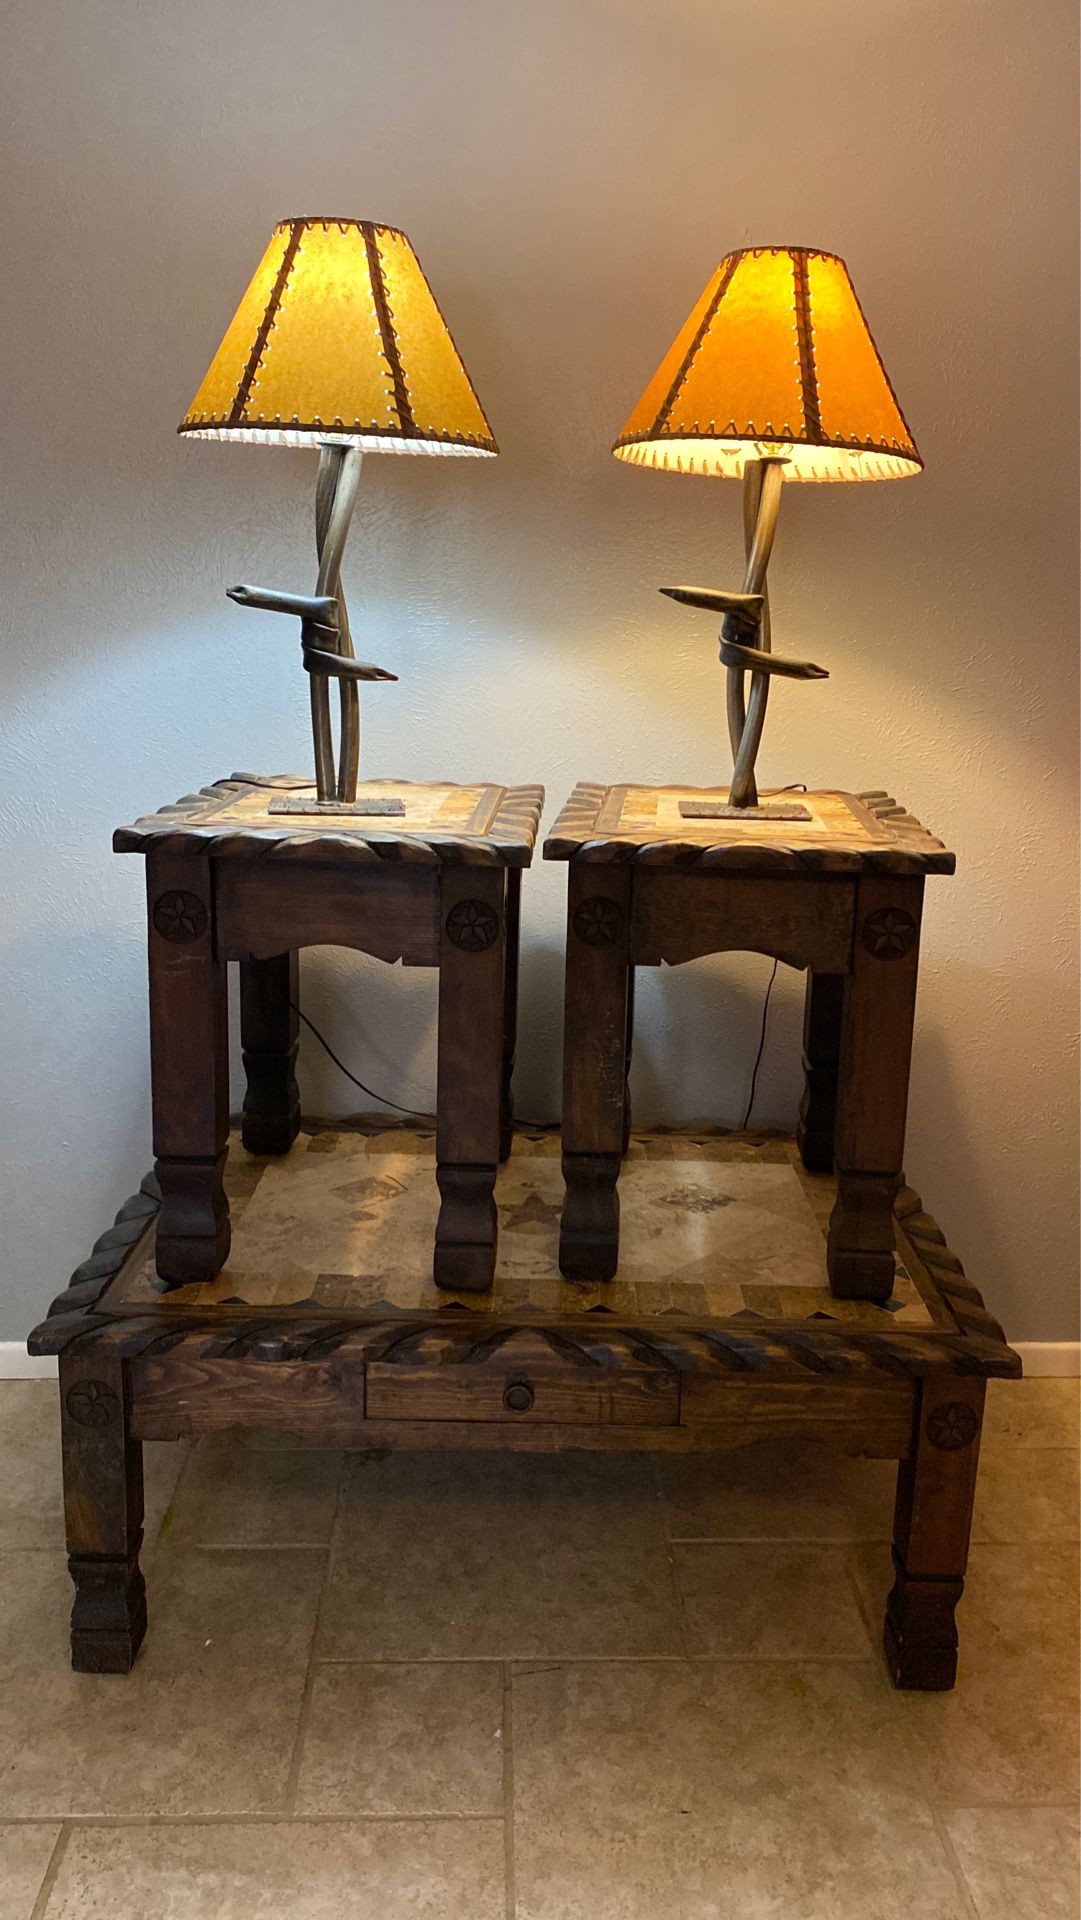 Western Coffee table, 2 end tables and 2 lamps